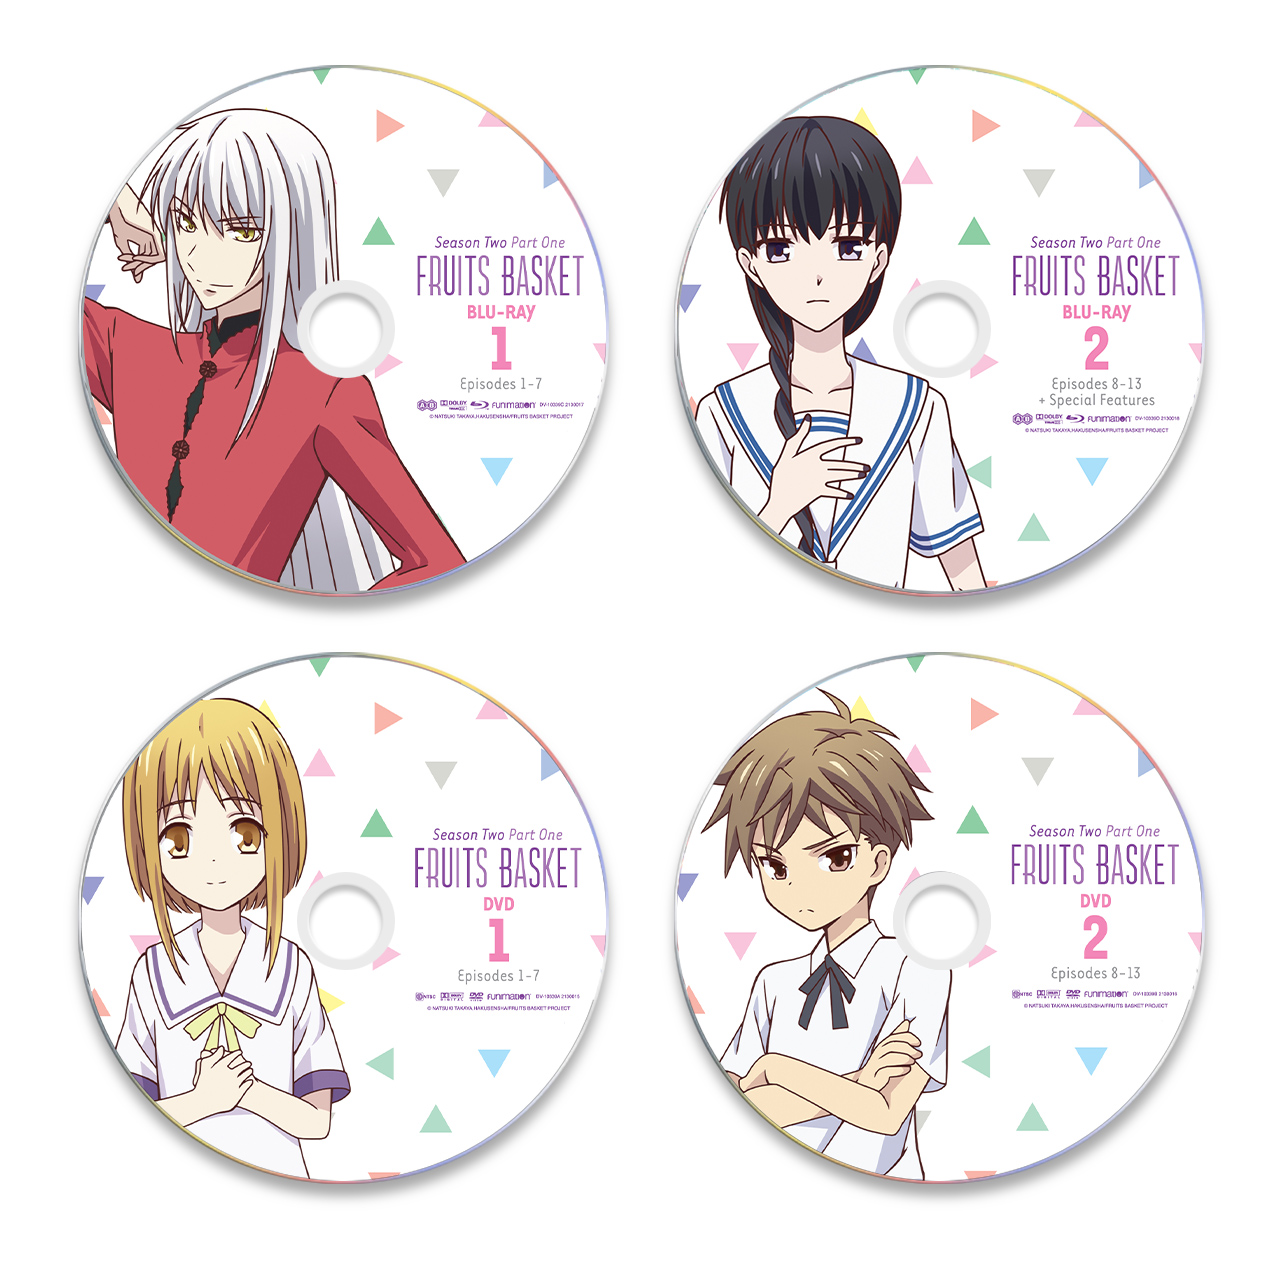 Fruits Basket (2019) - Season 2 Part 1 - Limited Edition - Blu-ray + DVD image count 5